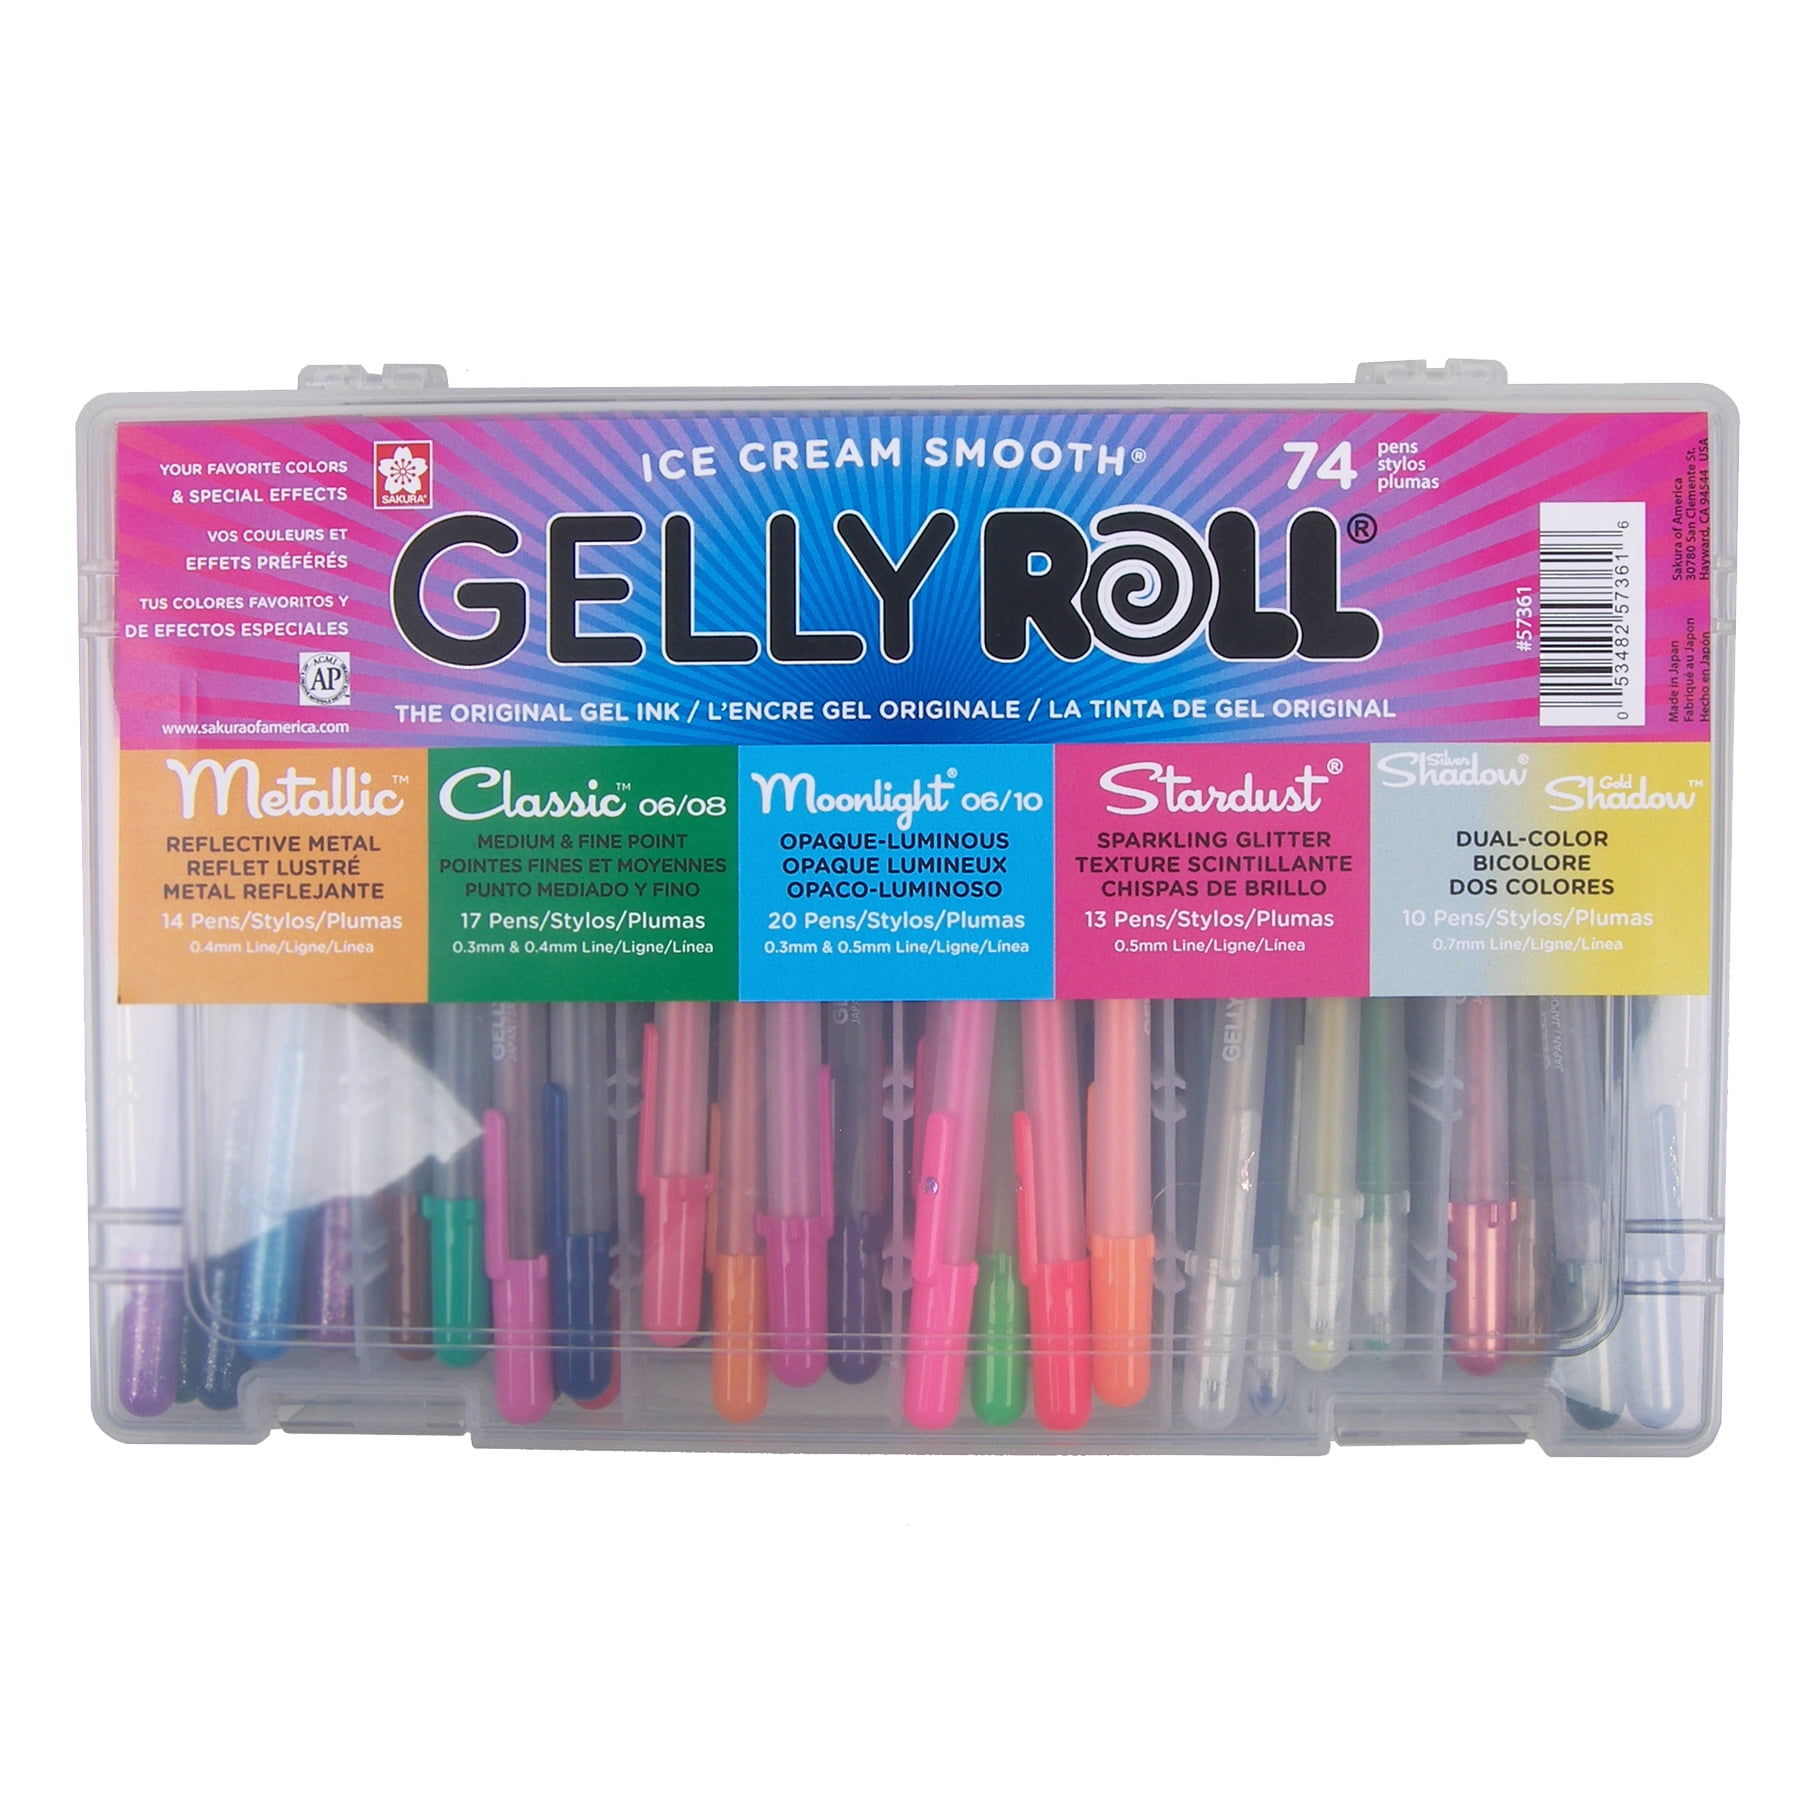 10 best gel pens for your arts and crafts projects - Gathered